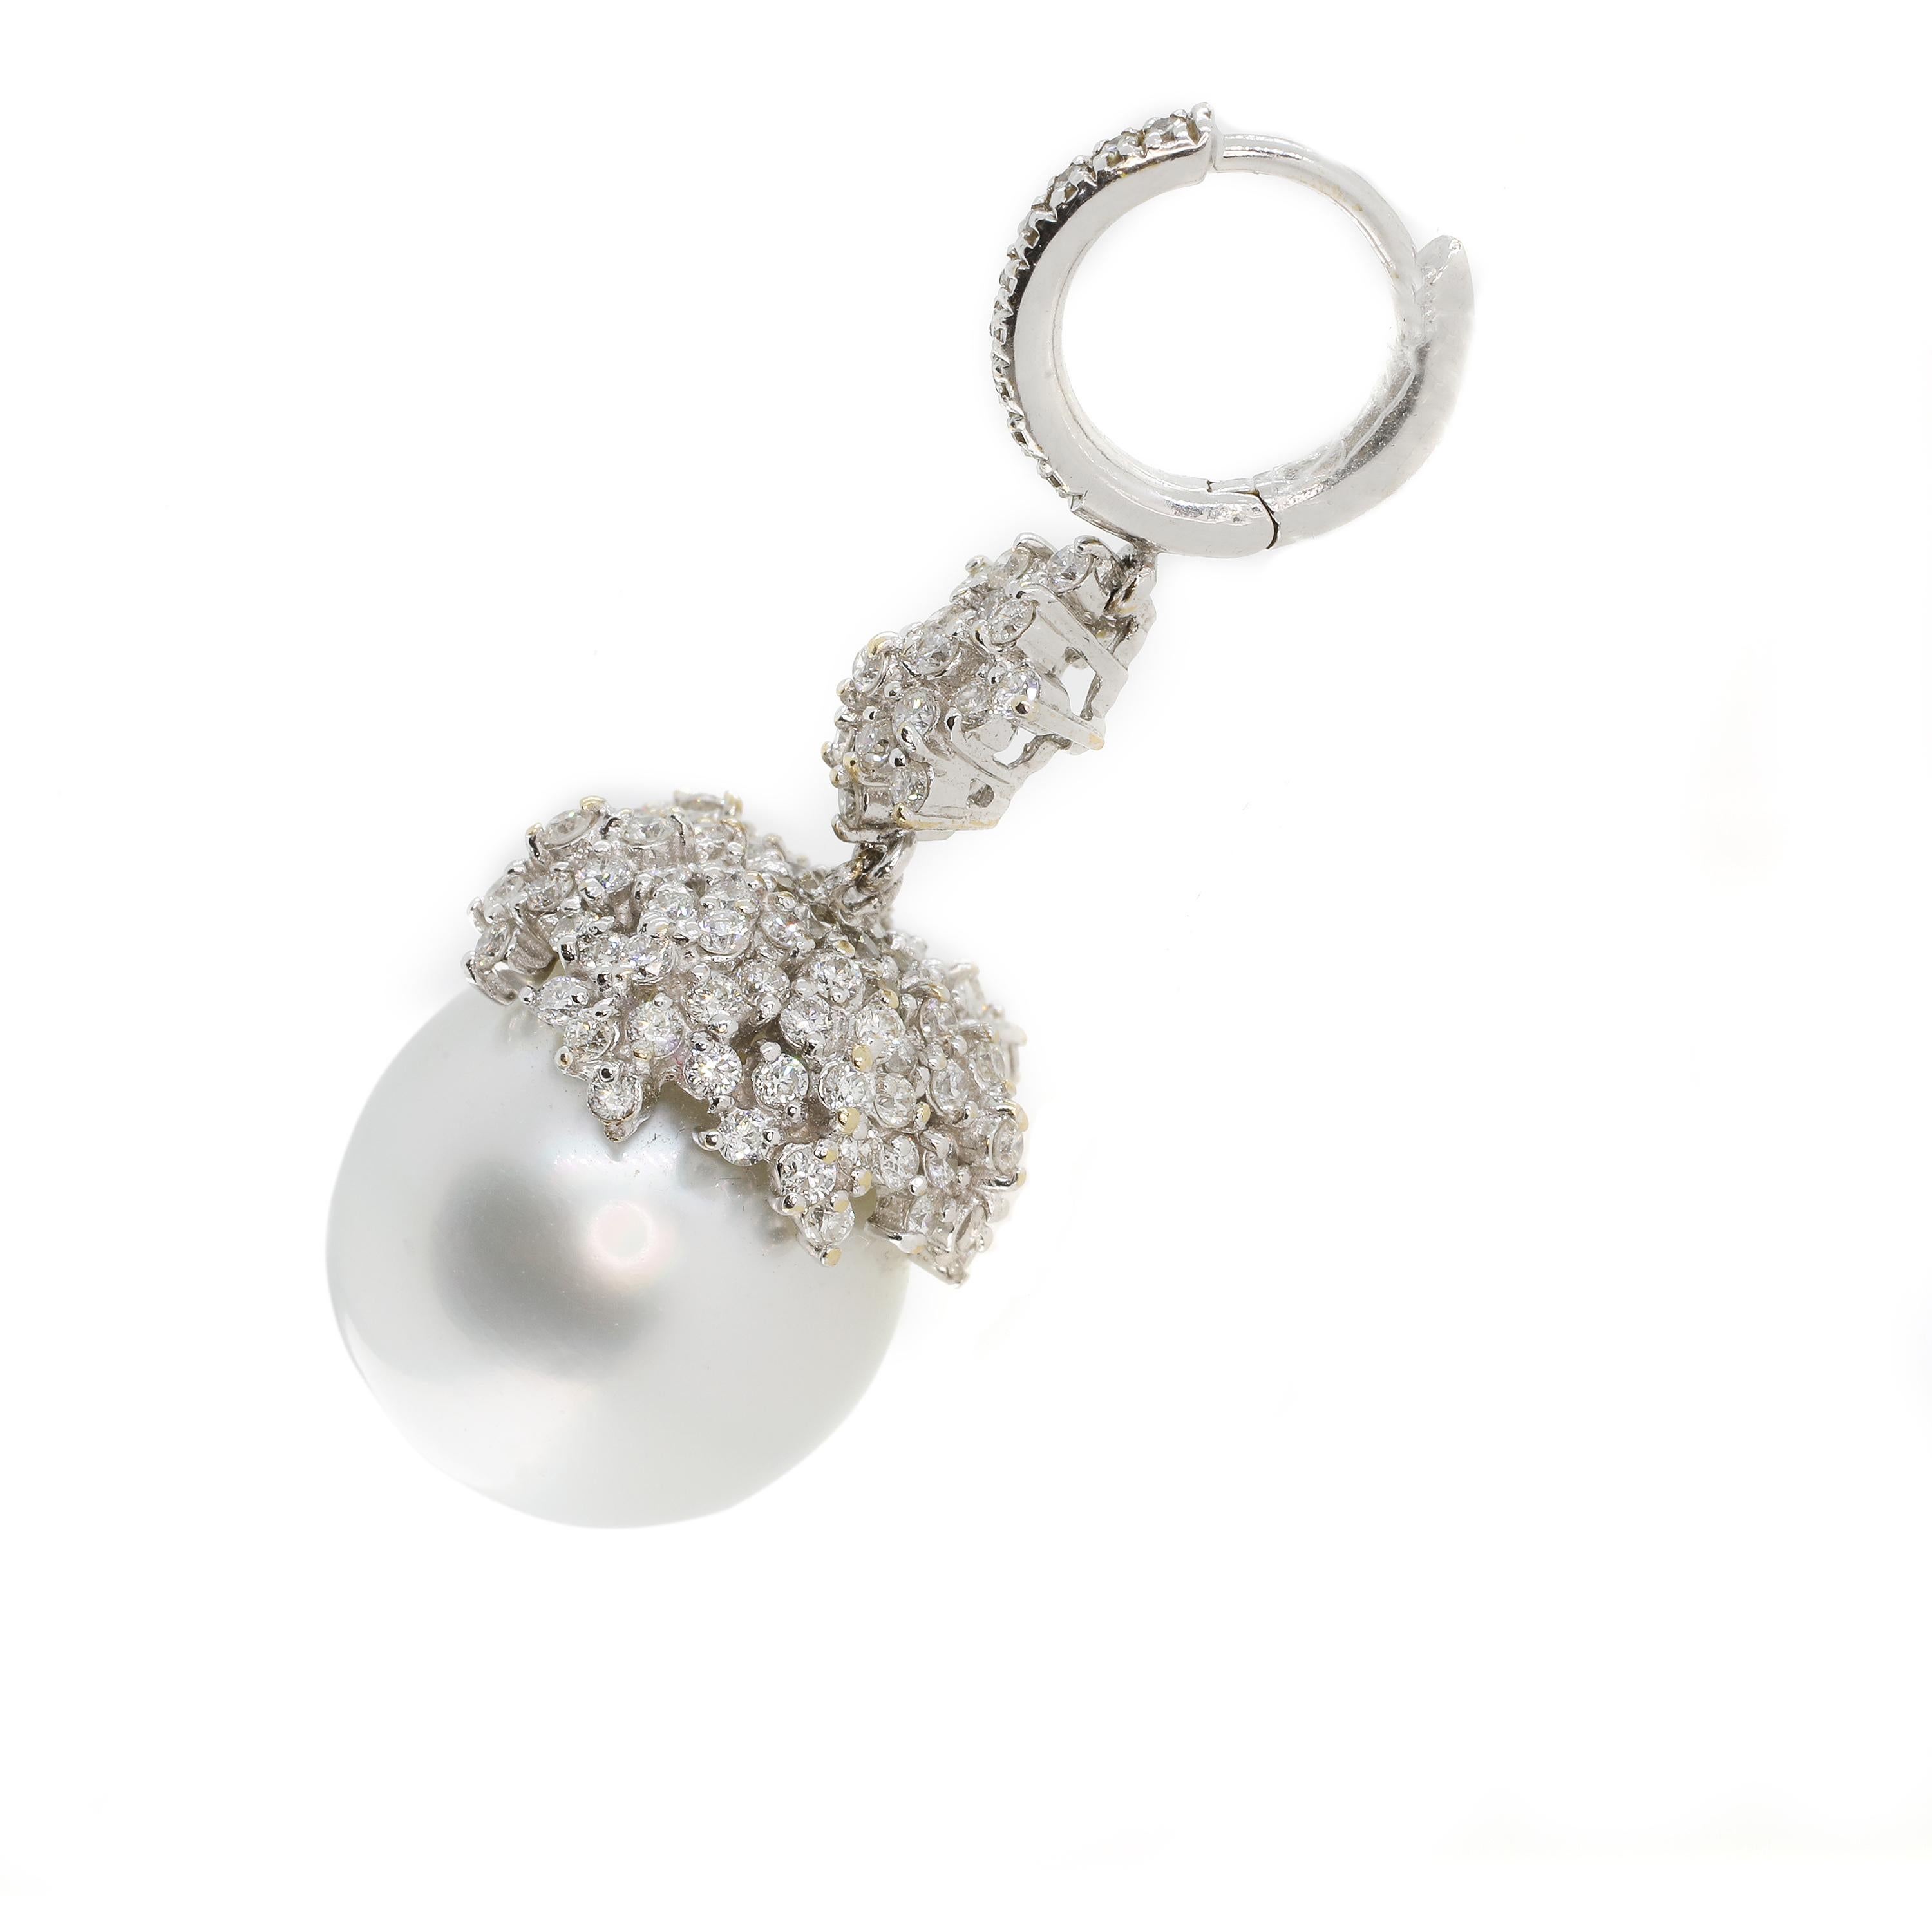 These earrings are sublimely designed around two large Australian pearls that weigh 61.80 carats (combined) and set with 2.46 carats of white diamonds in 18-karat white gold. The earrings are 40 millimetres long and feature a gorgeous circle clasp